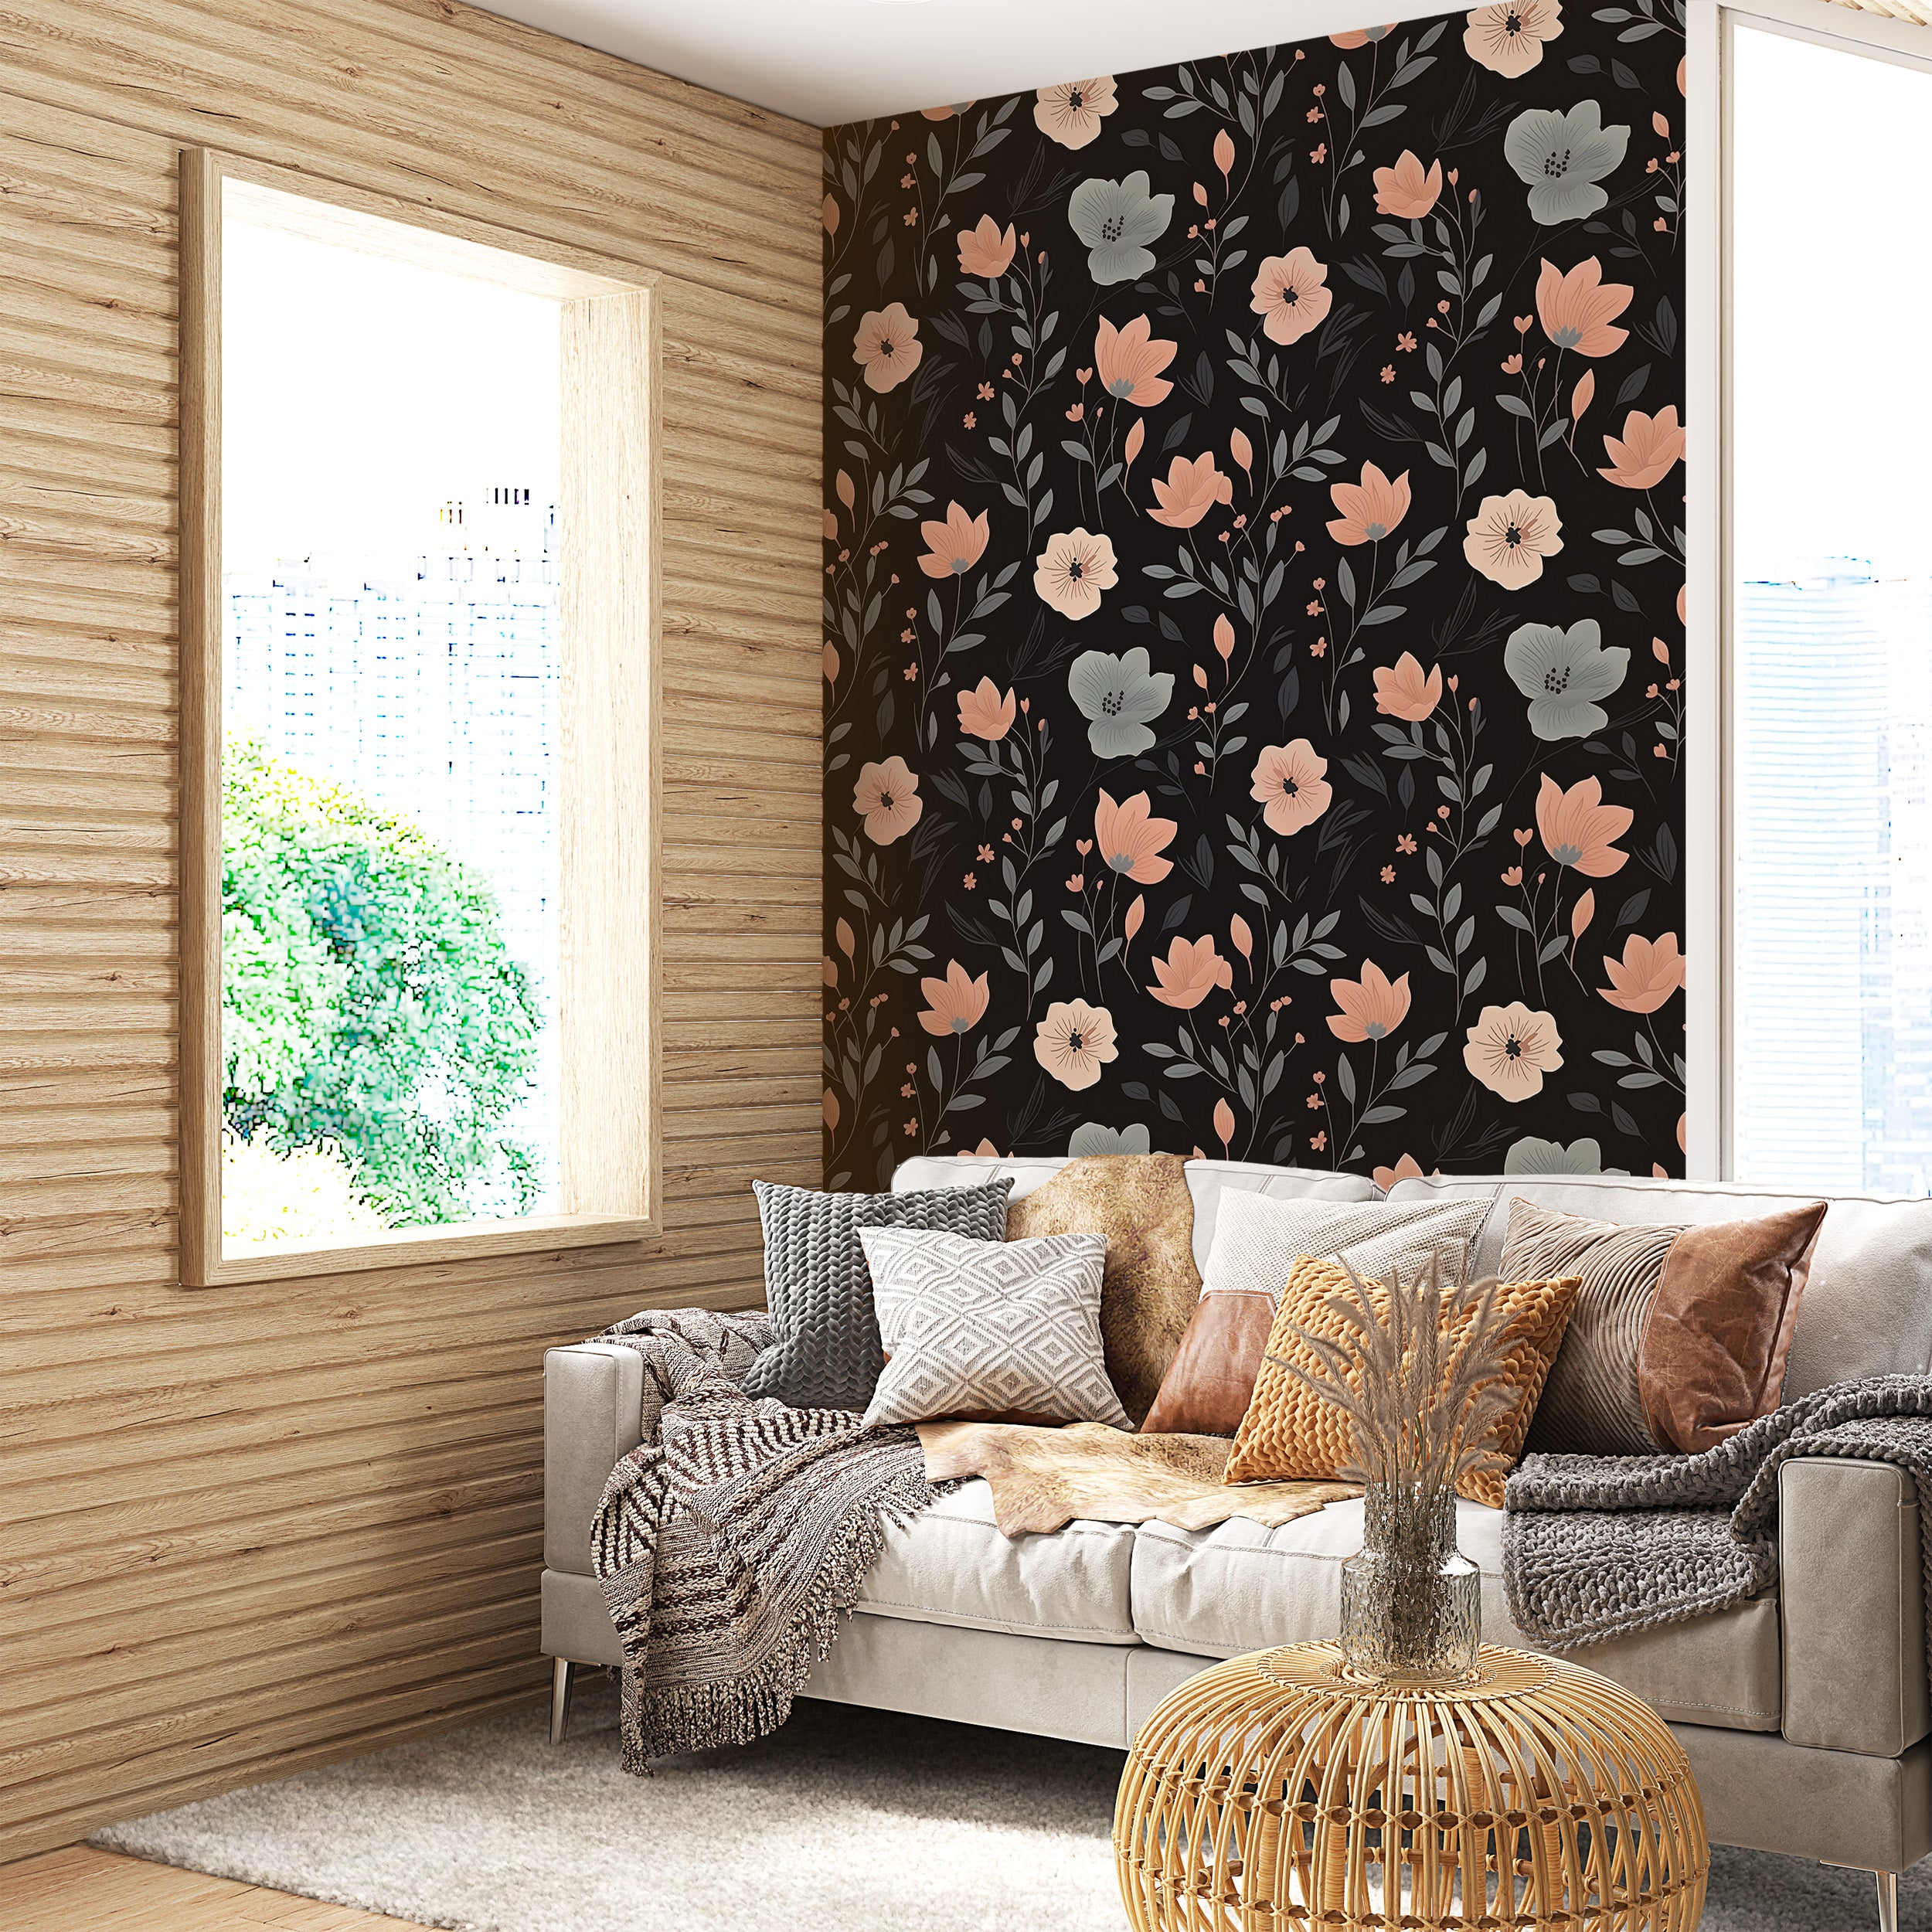 Redefine Space with Dark Floral Wall Art